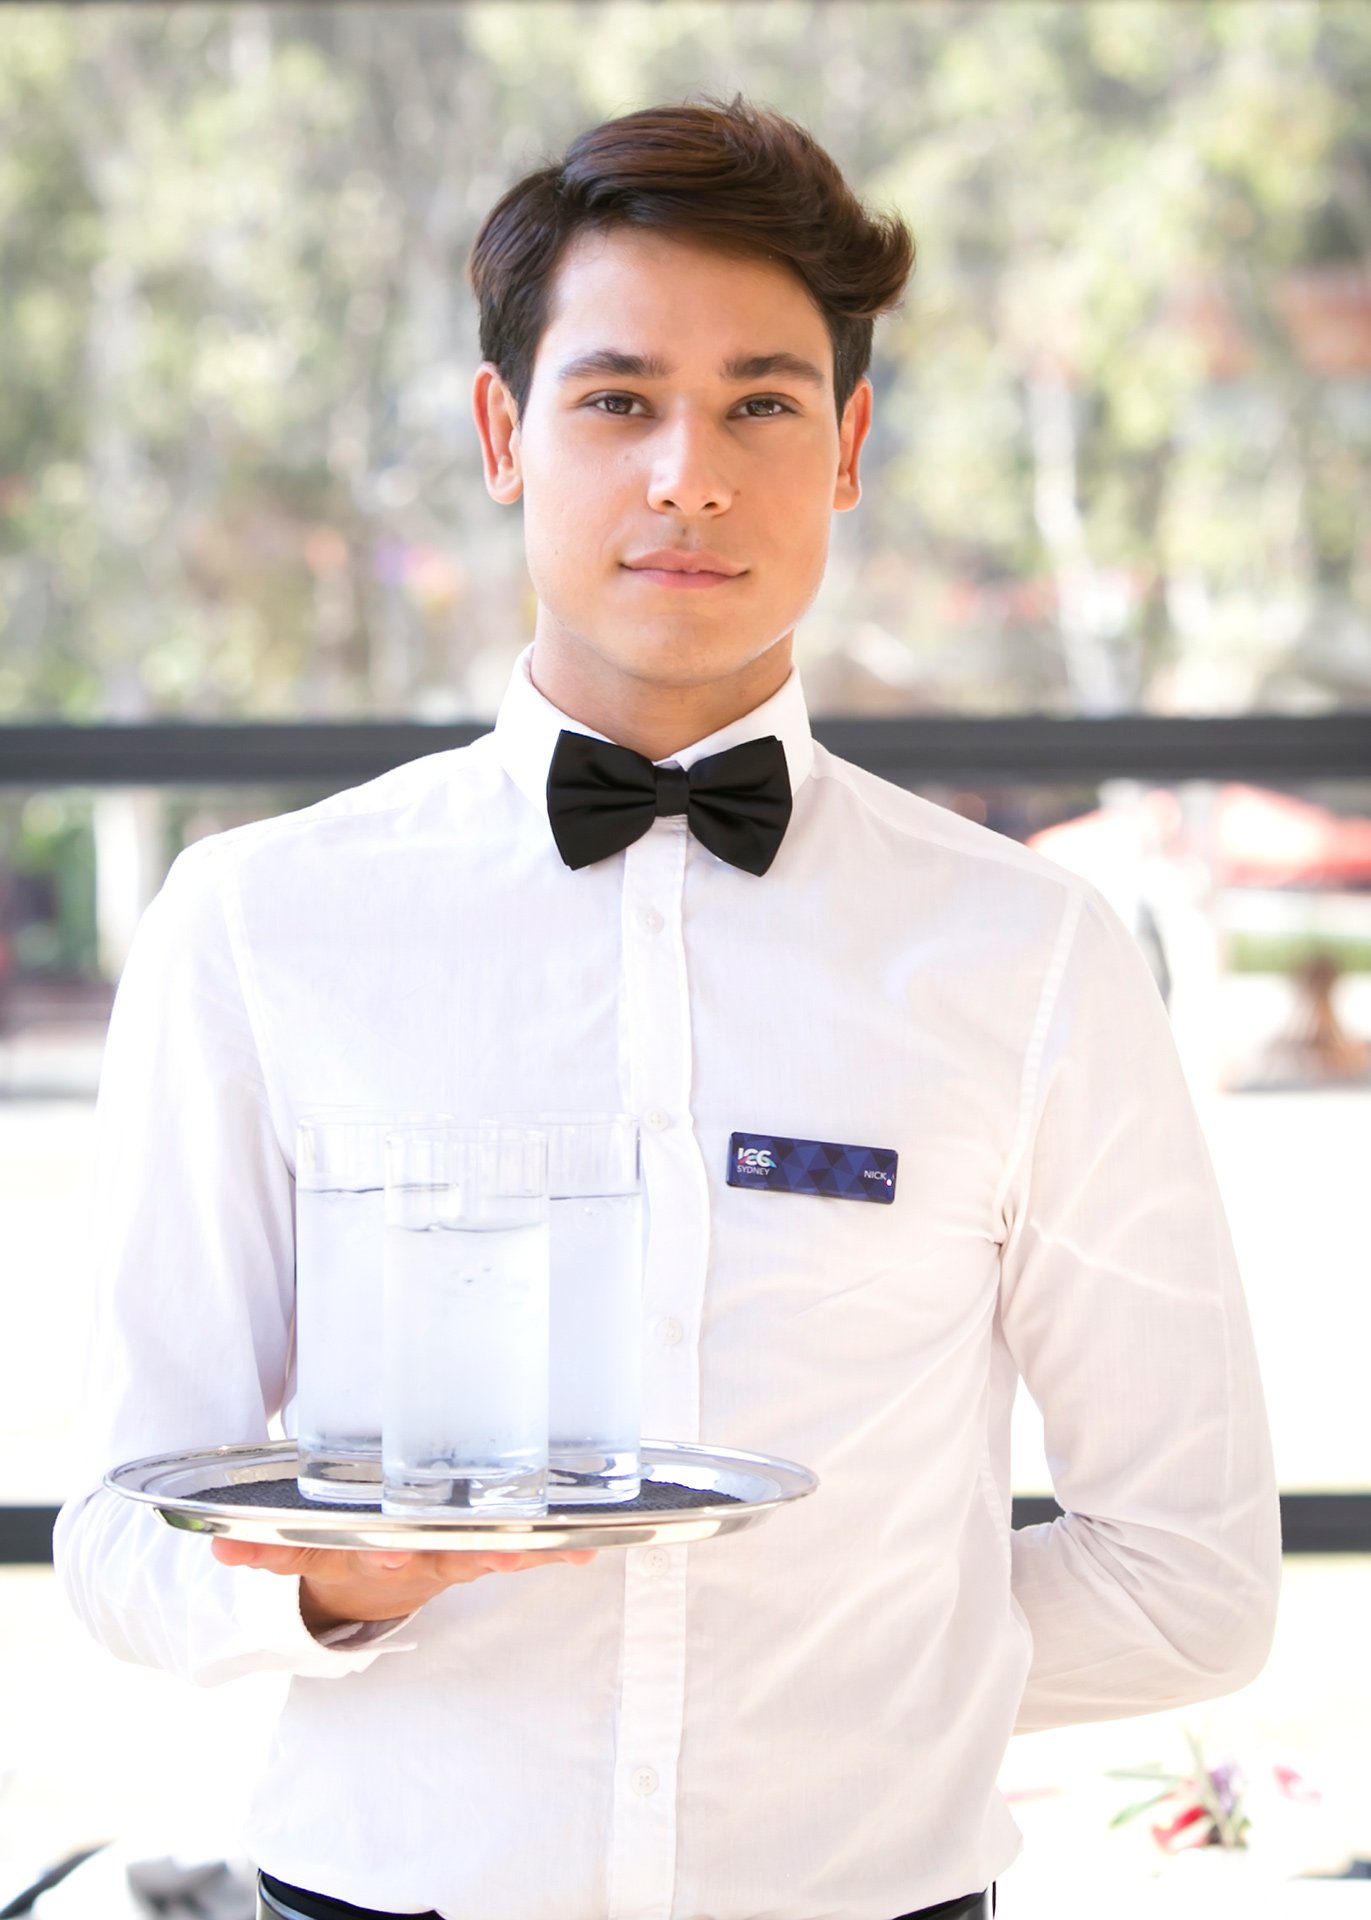  male waiter holding drinks tray ICC Sydney kirsten cox photography events 